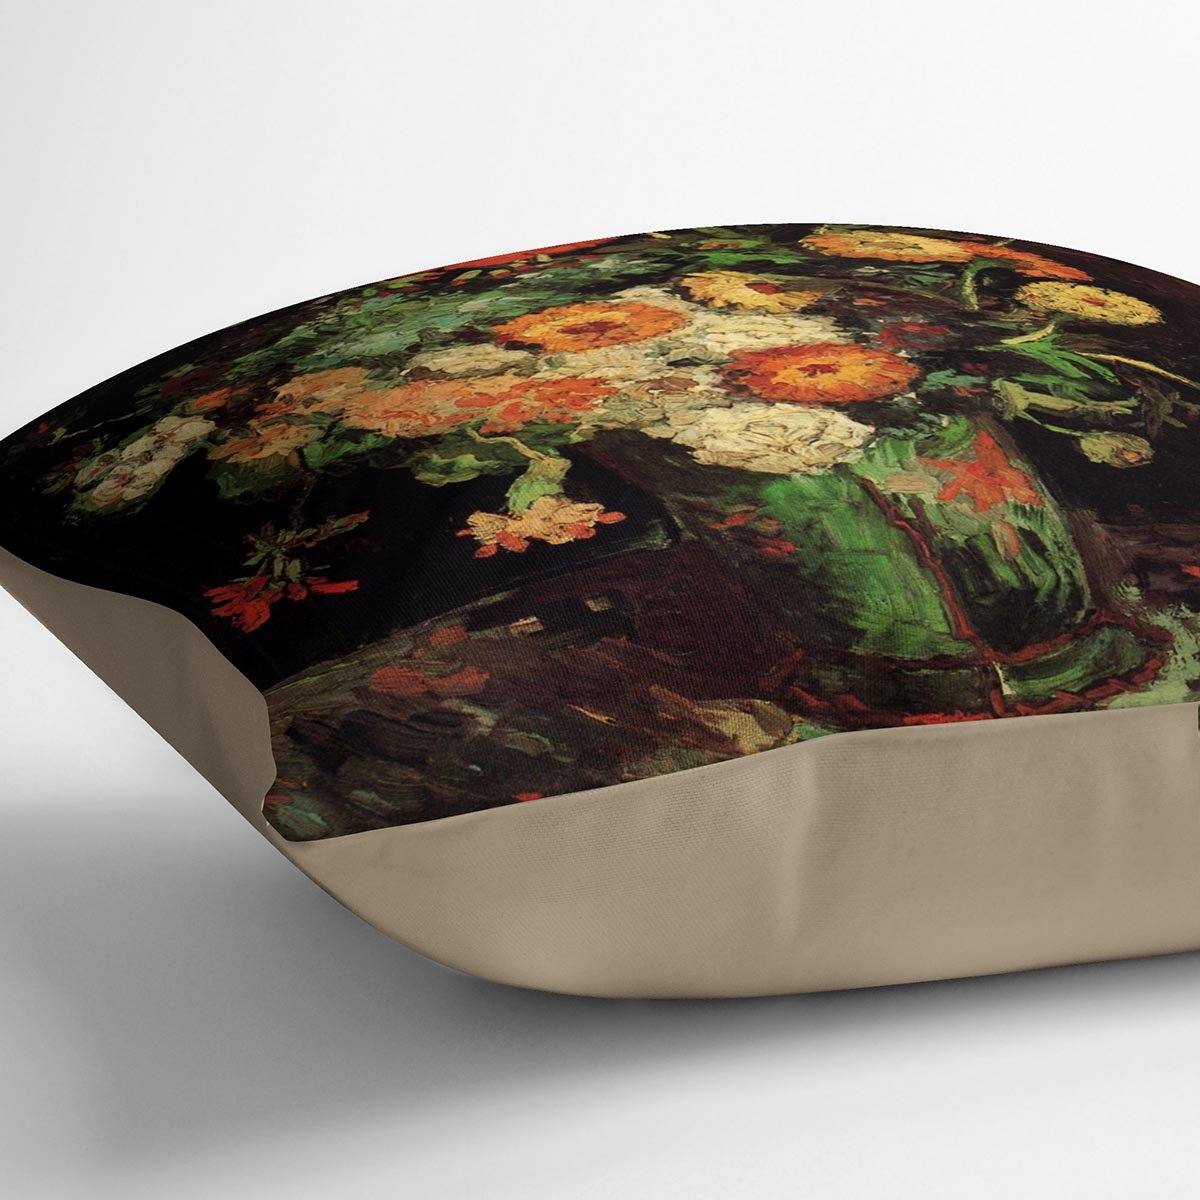 Vase with Zinnias and Geraniums by Van Gogh Throw Pillow